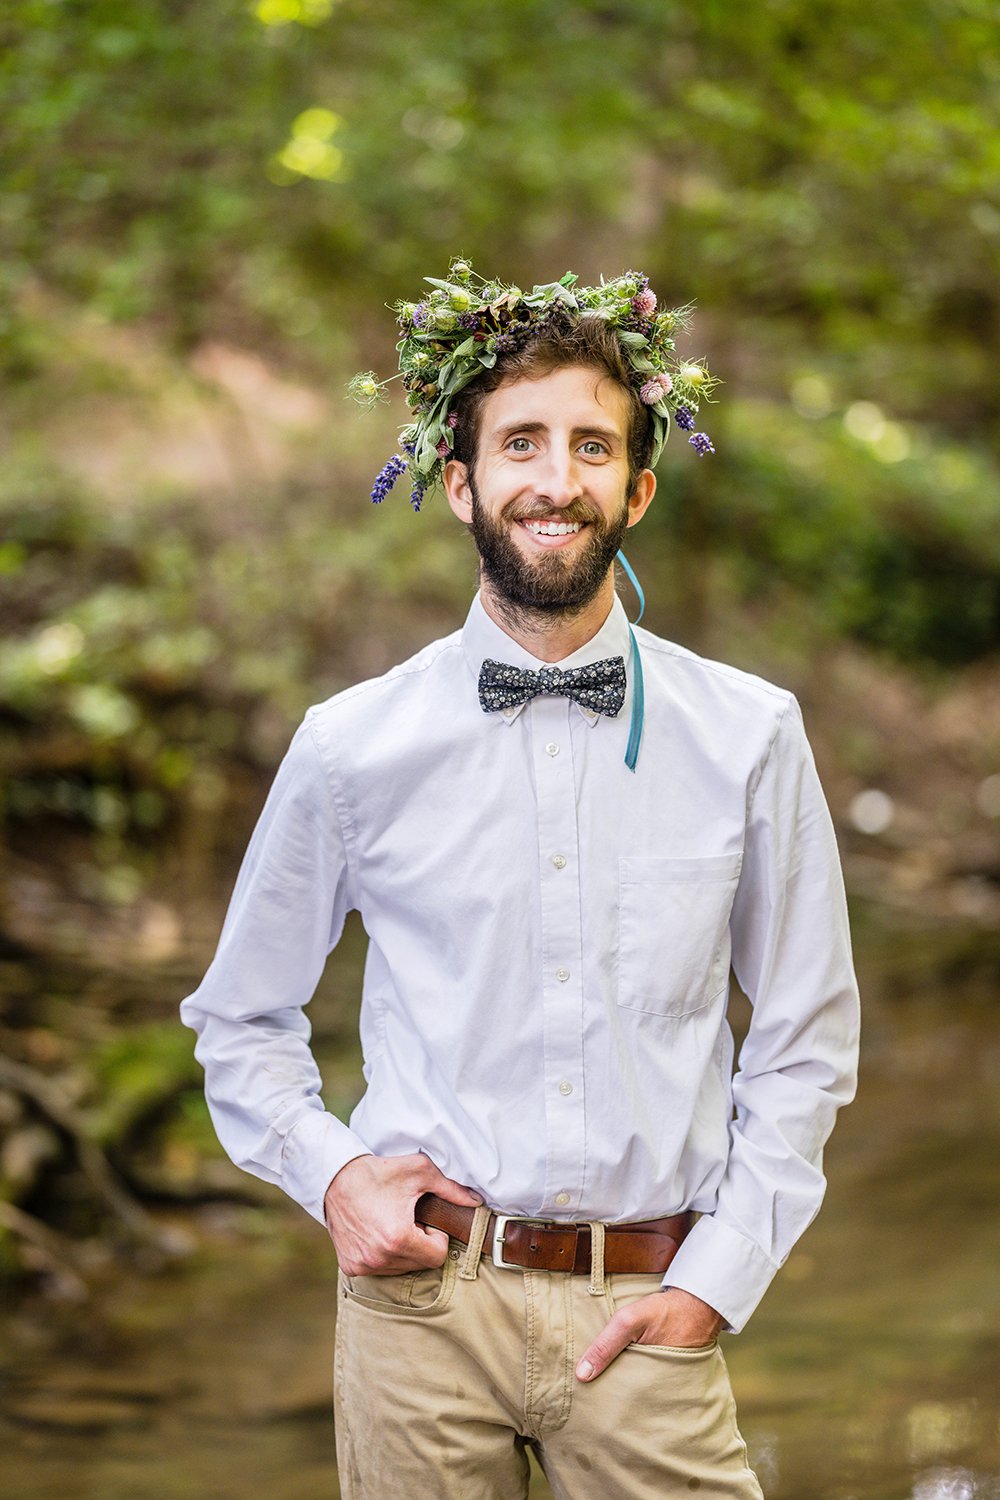 An LGBTQ+ marrier poses wearing a simple button up shirt, bowtie, and khakis and a flower crown stands in the creek under a canopy of trees for his portraits at Fishburn Park in Roanoke, Virginia.